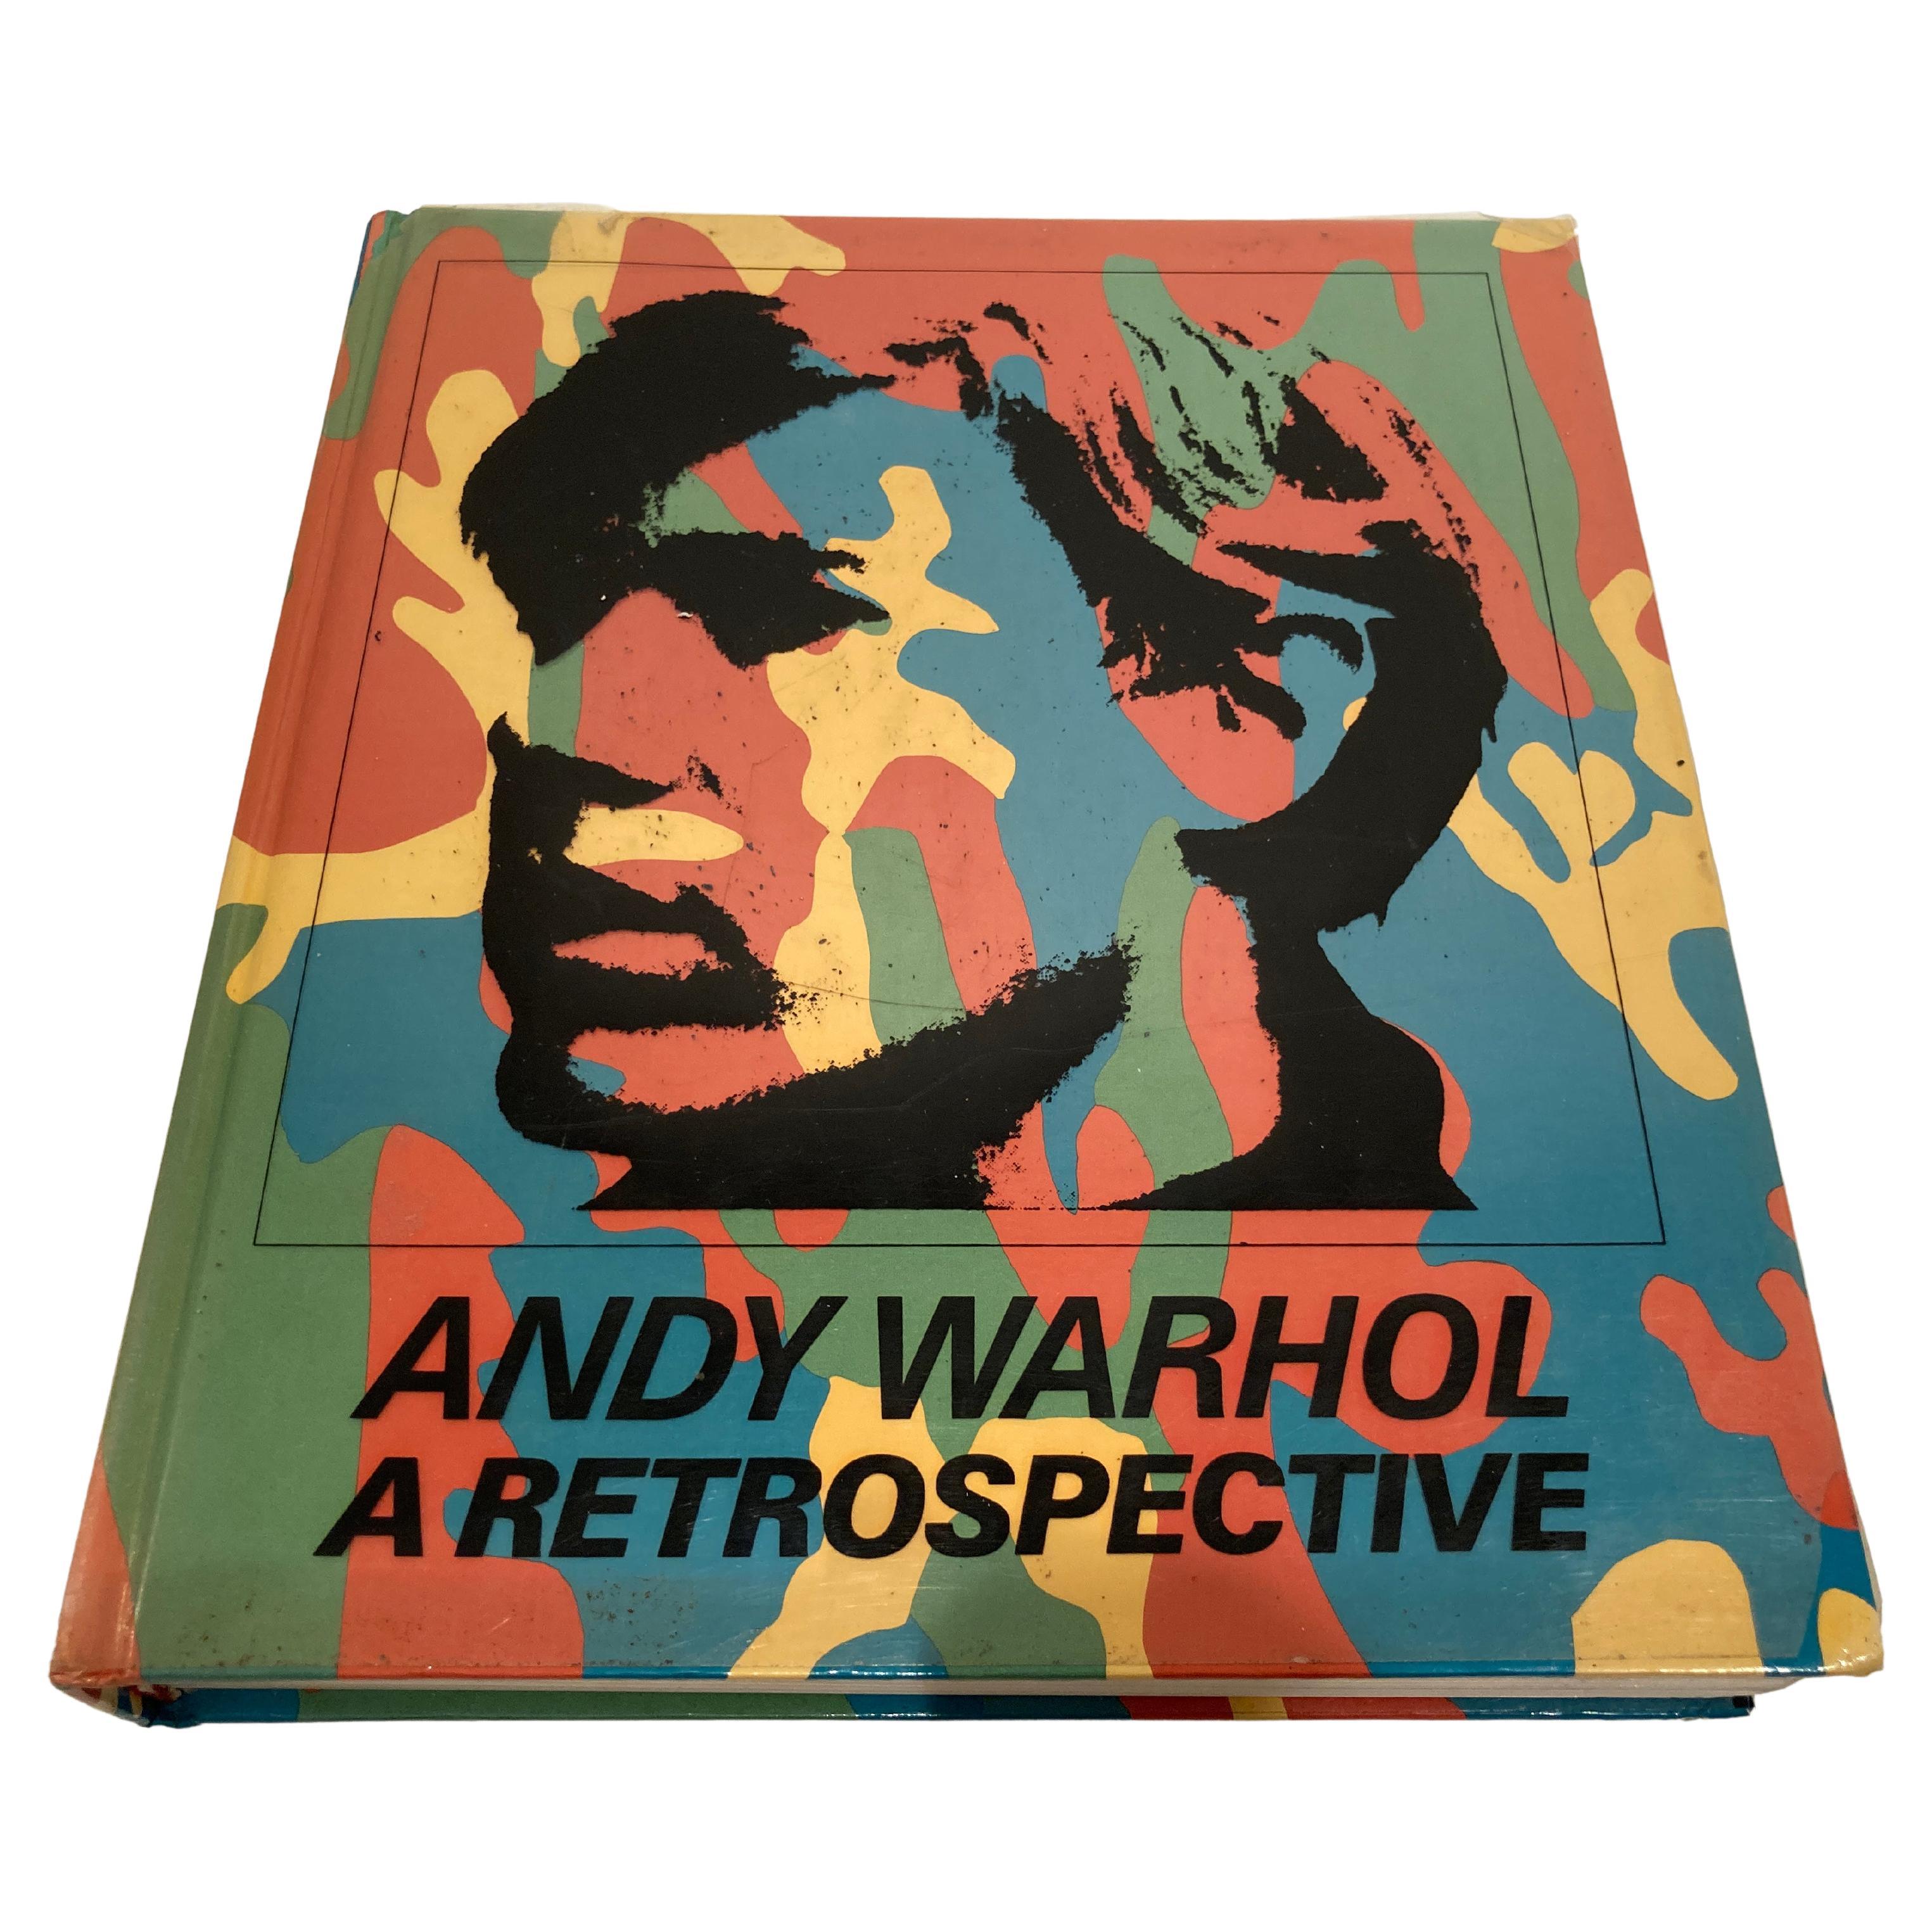 Andy Warhol A Retrospective, Hard-Cover Coffee Table Book, 1989